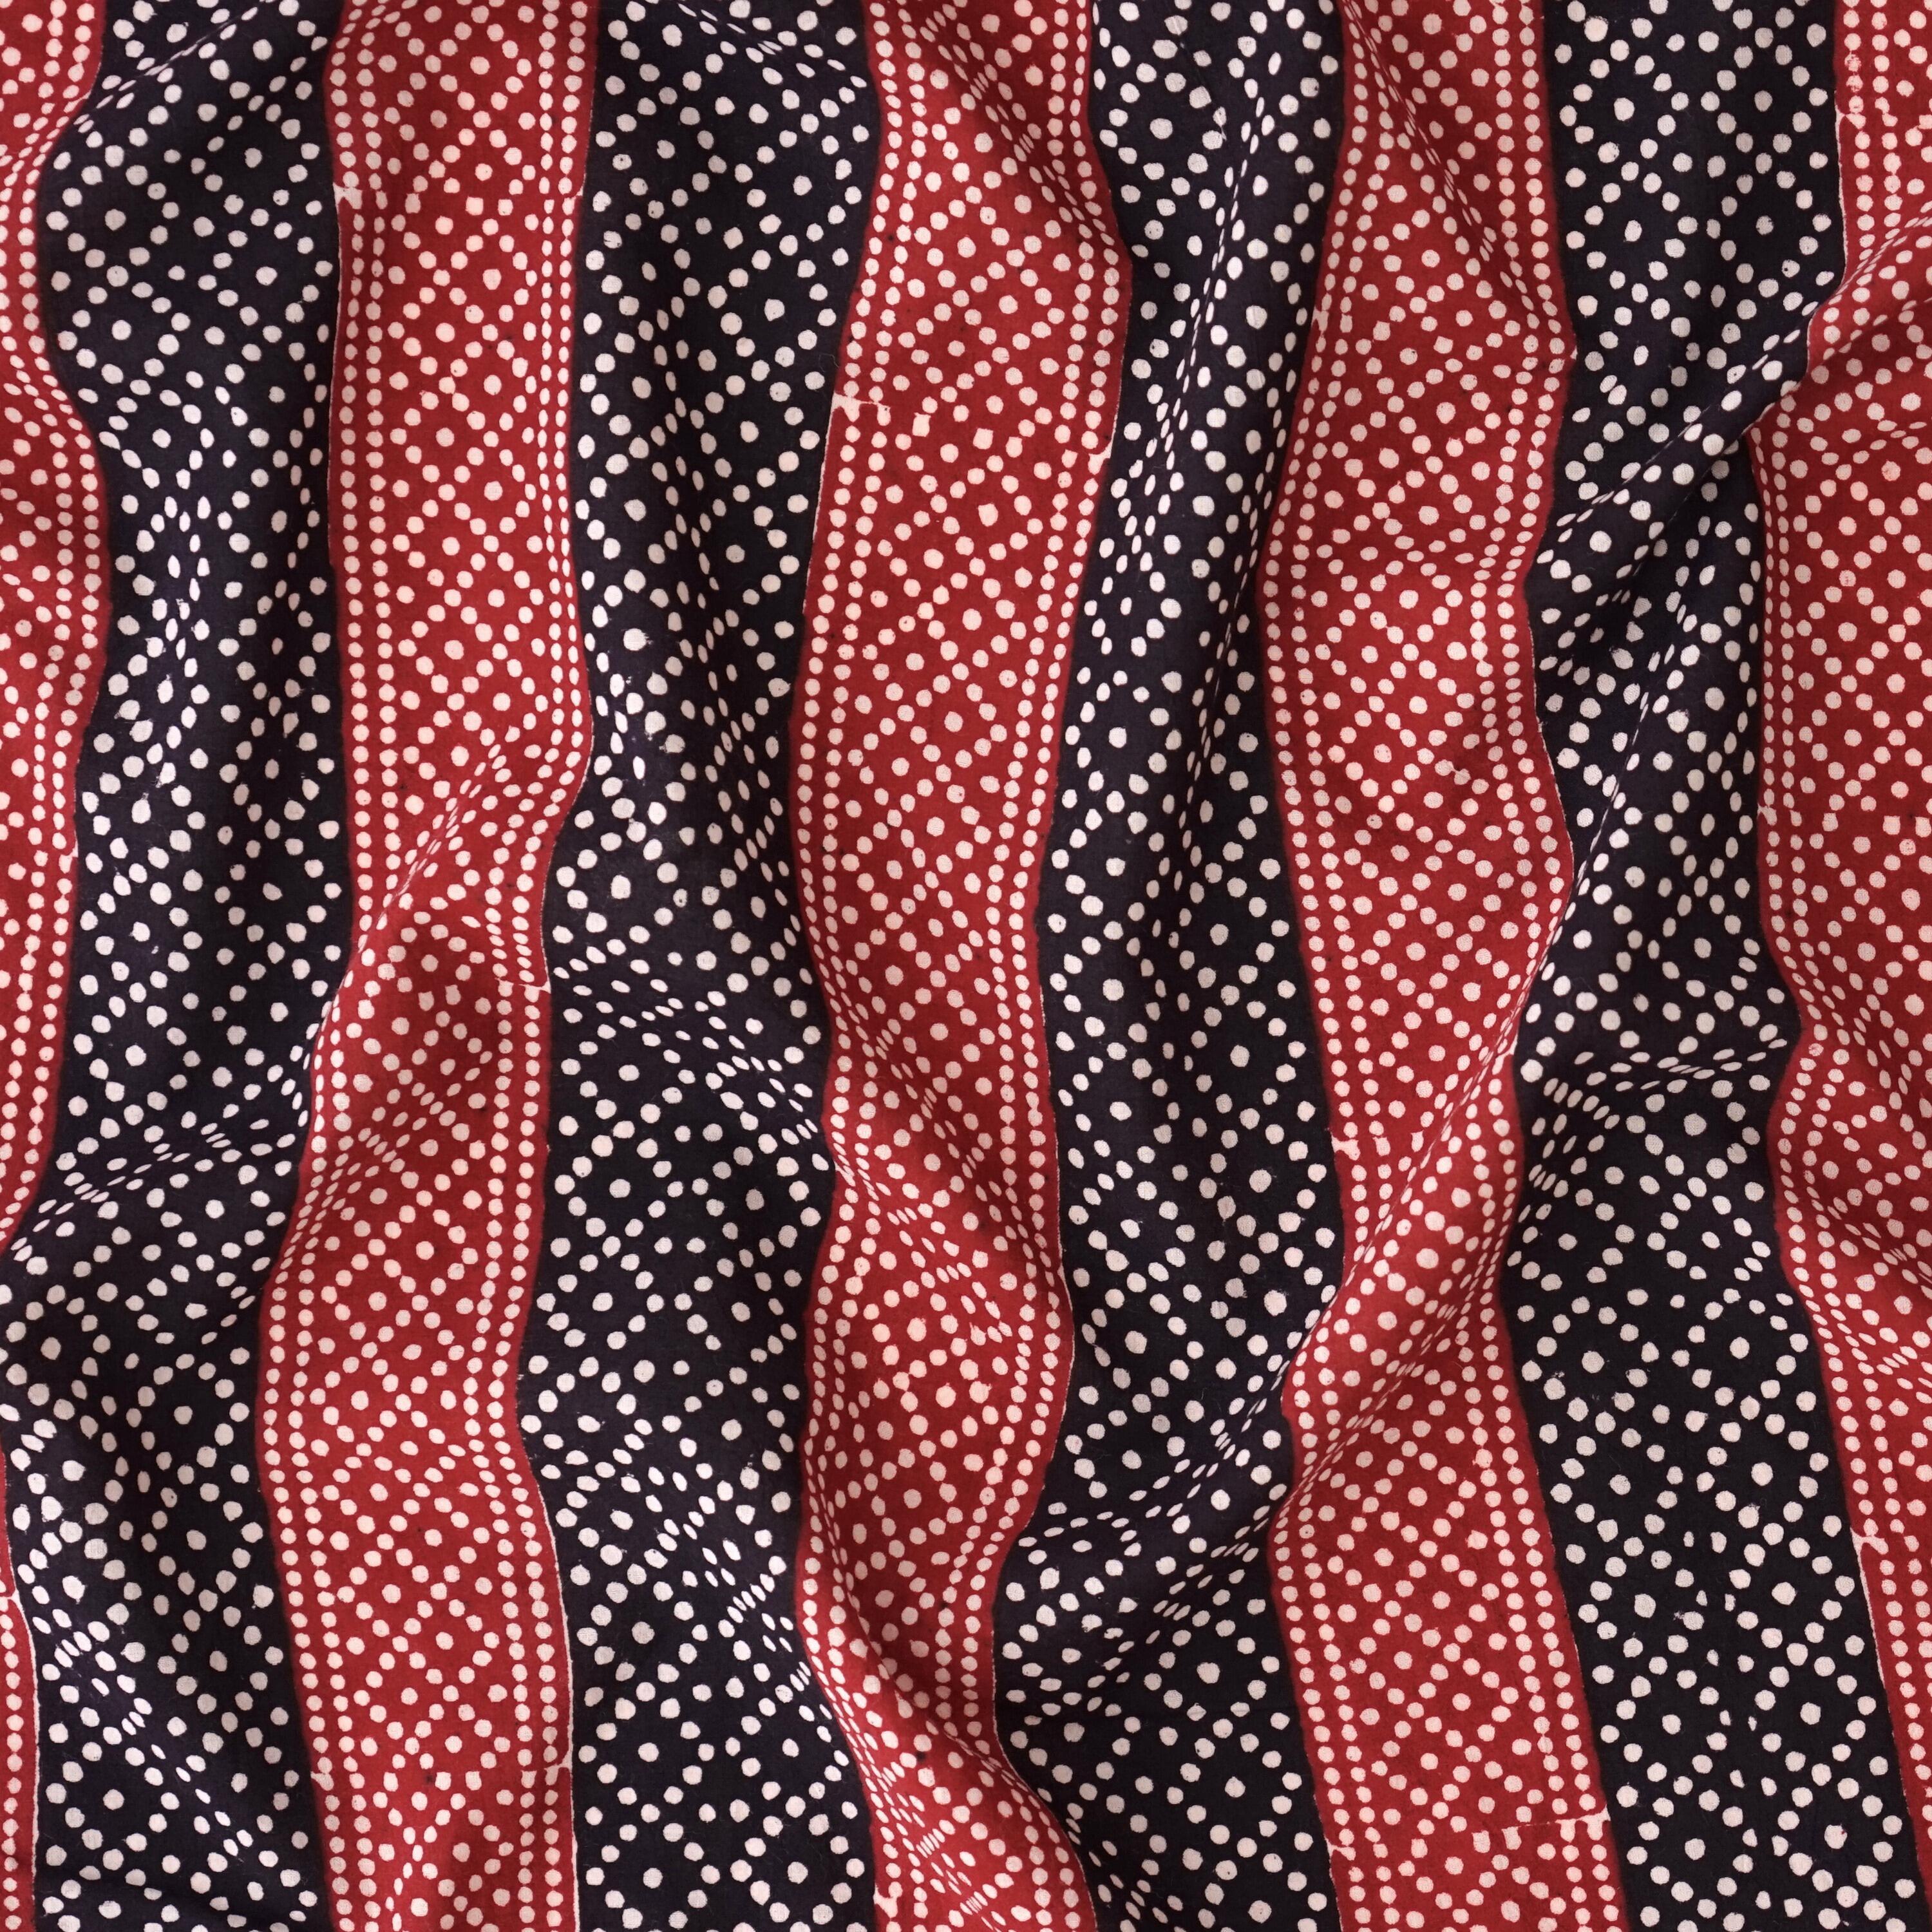 100% Block-Printed Cotton Fabric From India - Pixels Design - Iron Rust Black & Alizarin Red Dyes - Contrast